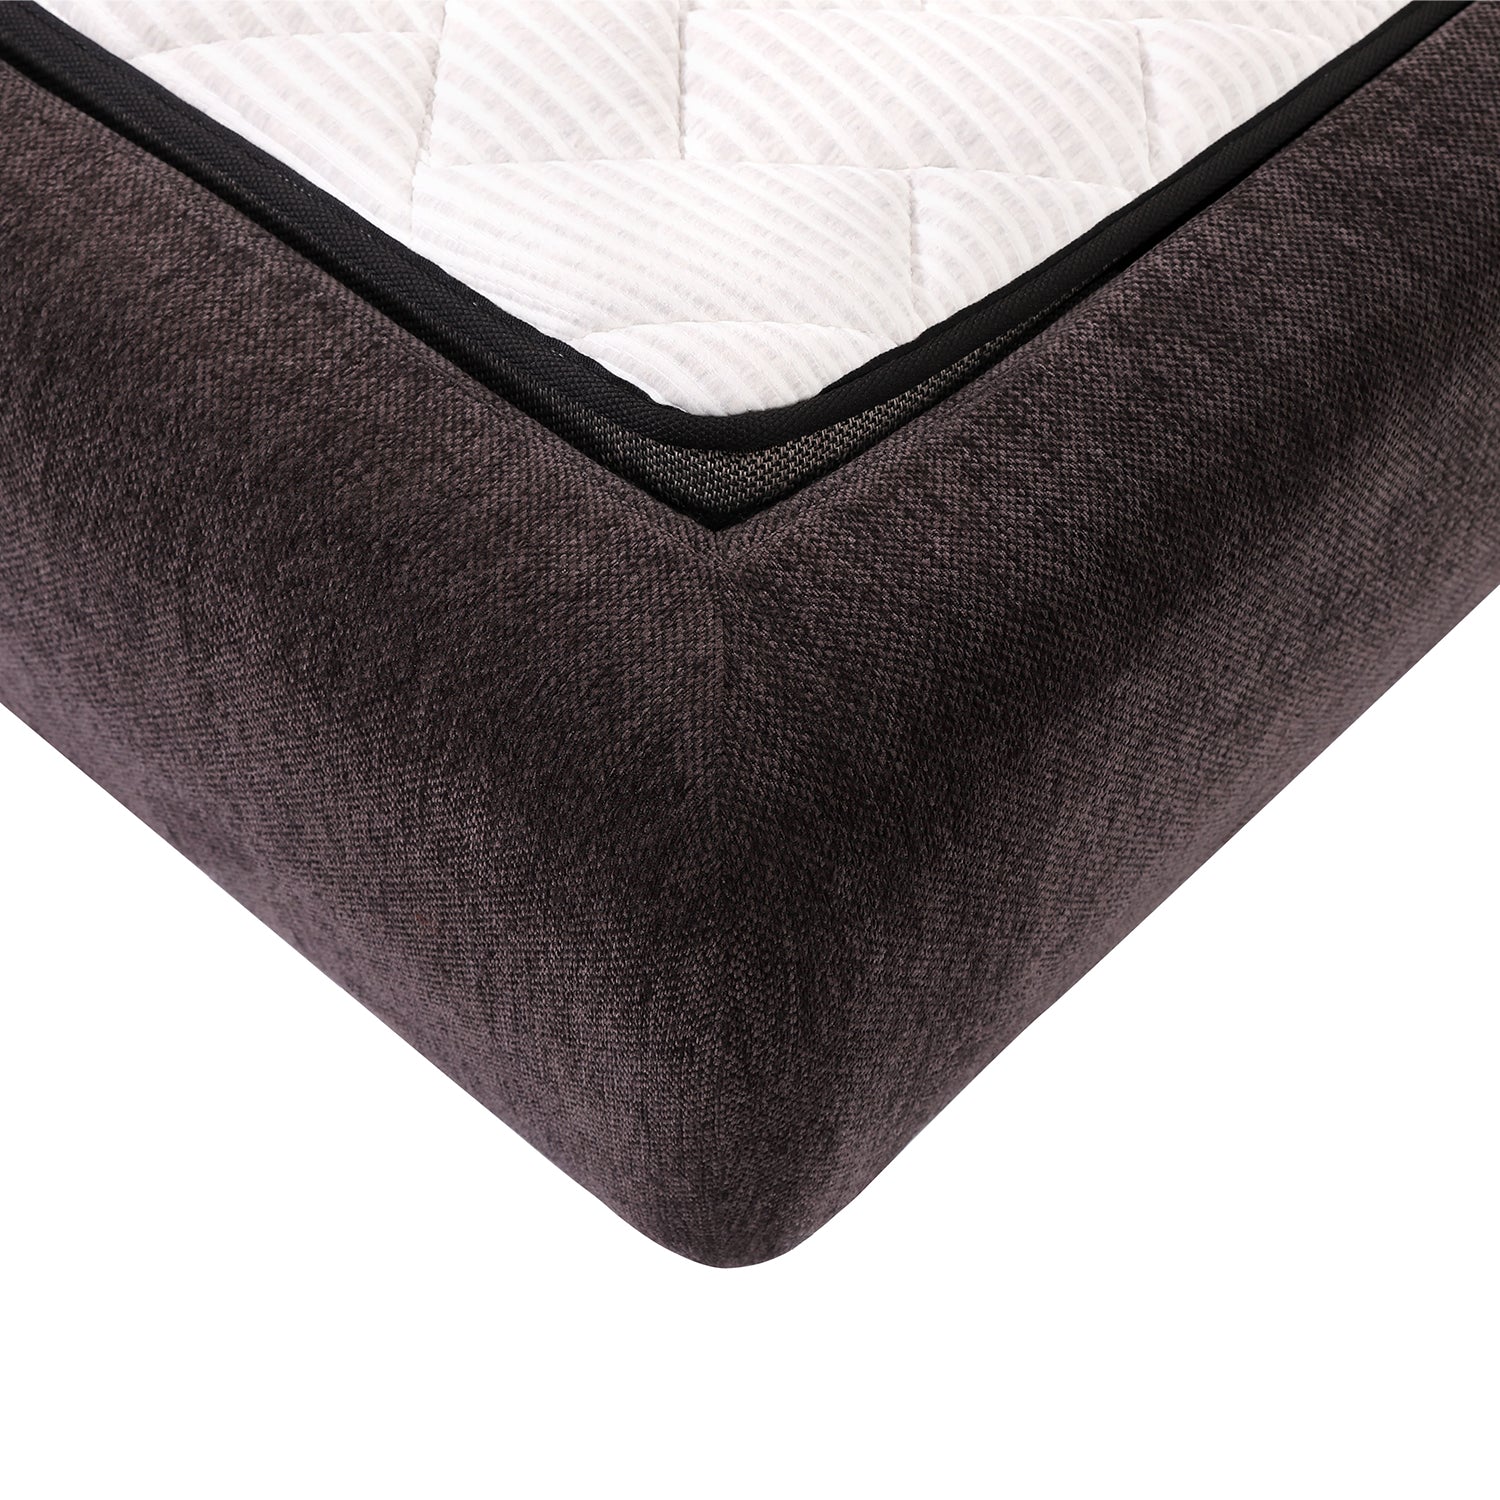 Close-up of Bed Frame BZZ4 - 117 corner with dark fabric upholstery and soft cushion with quilted white cover.